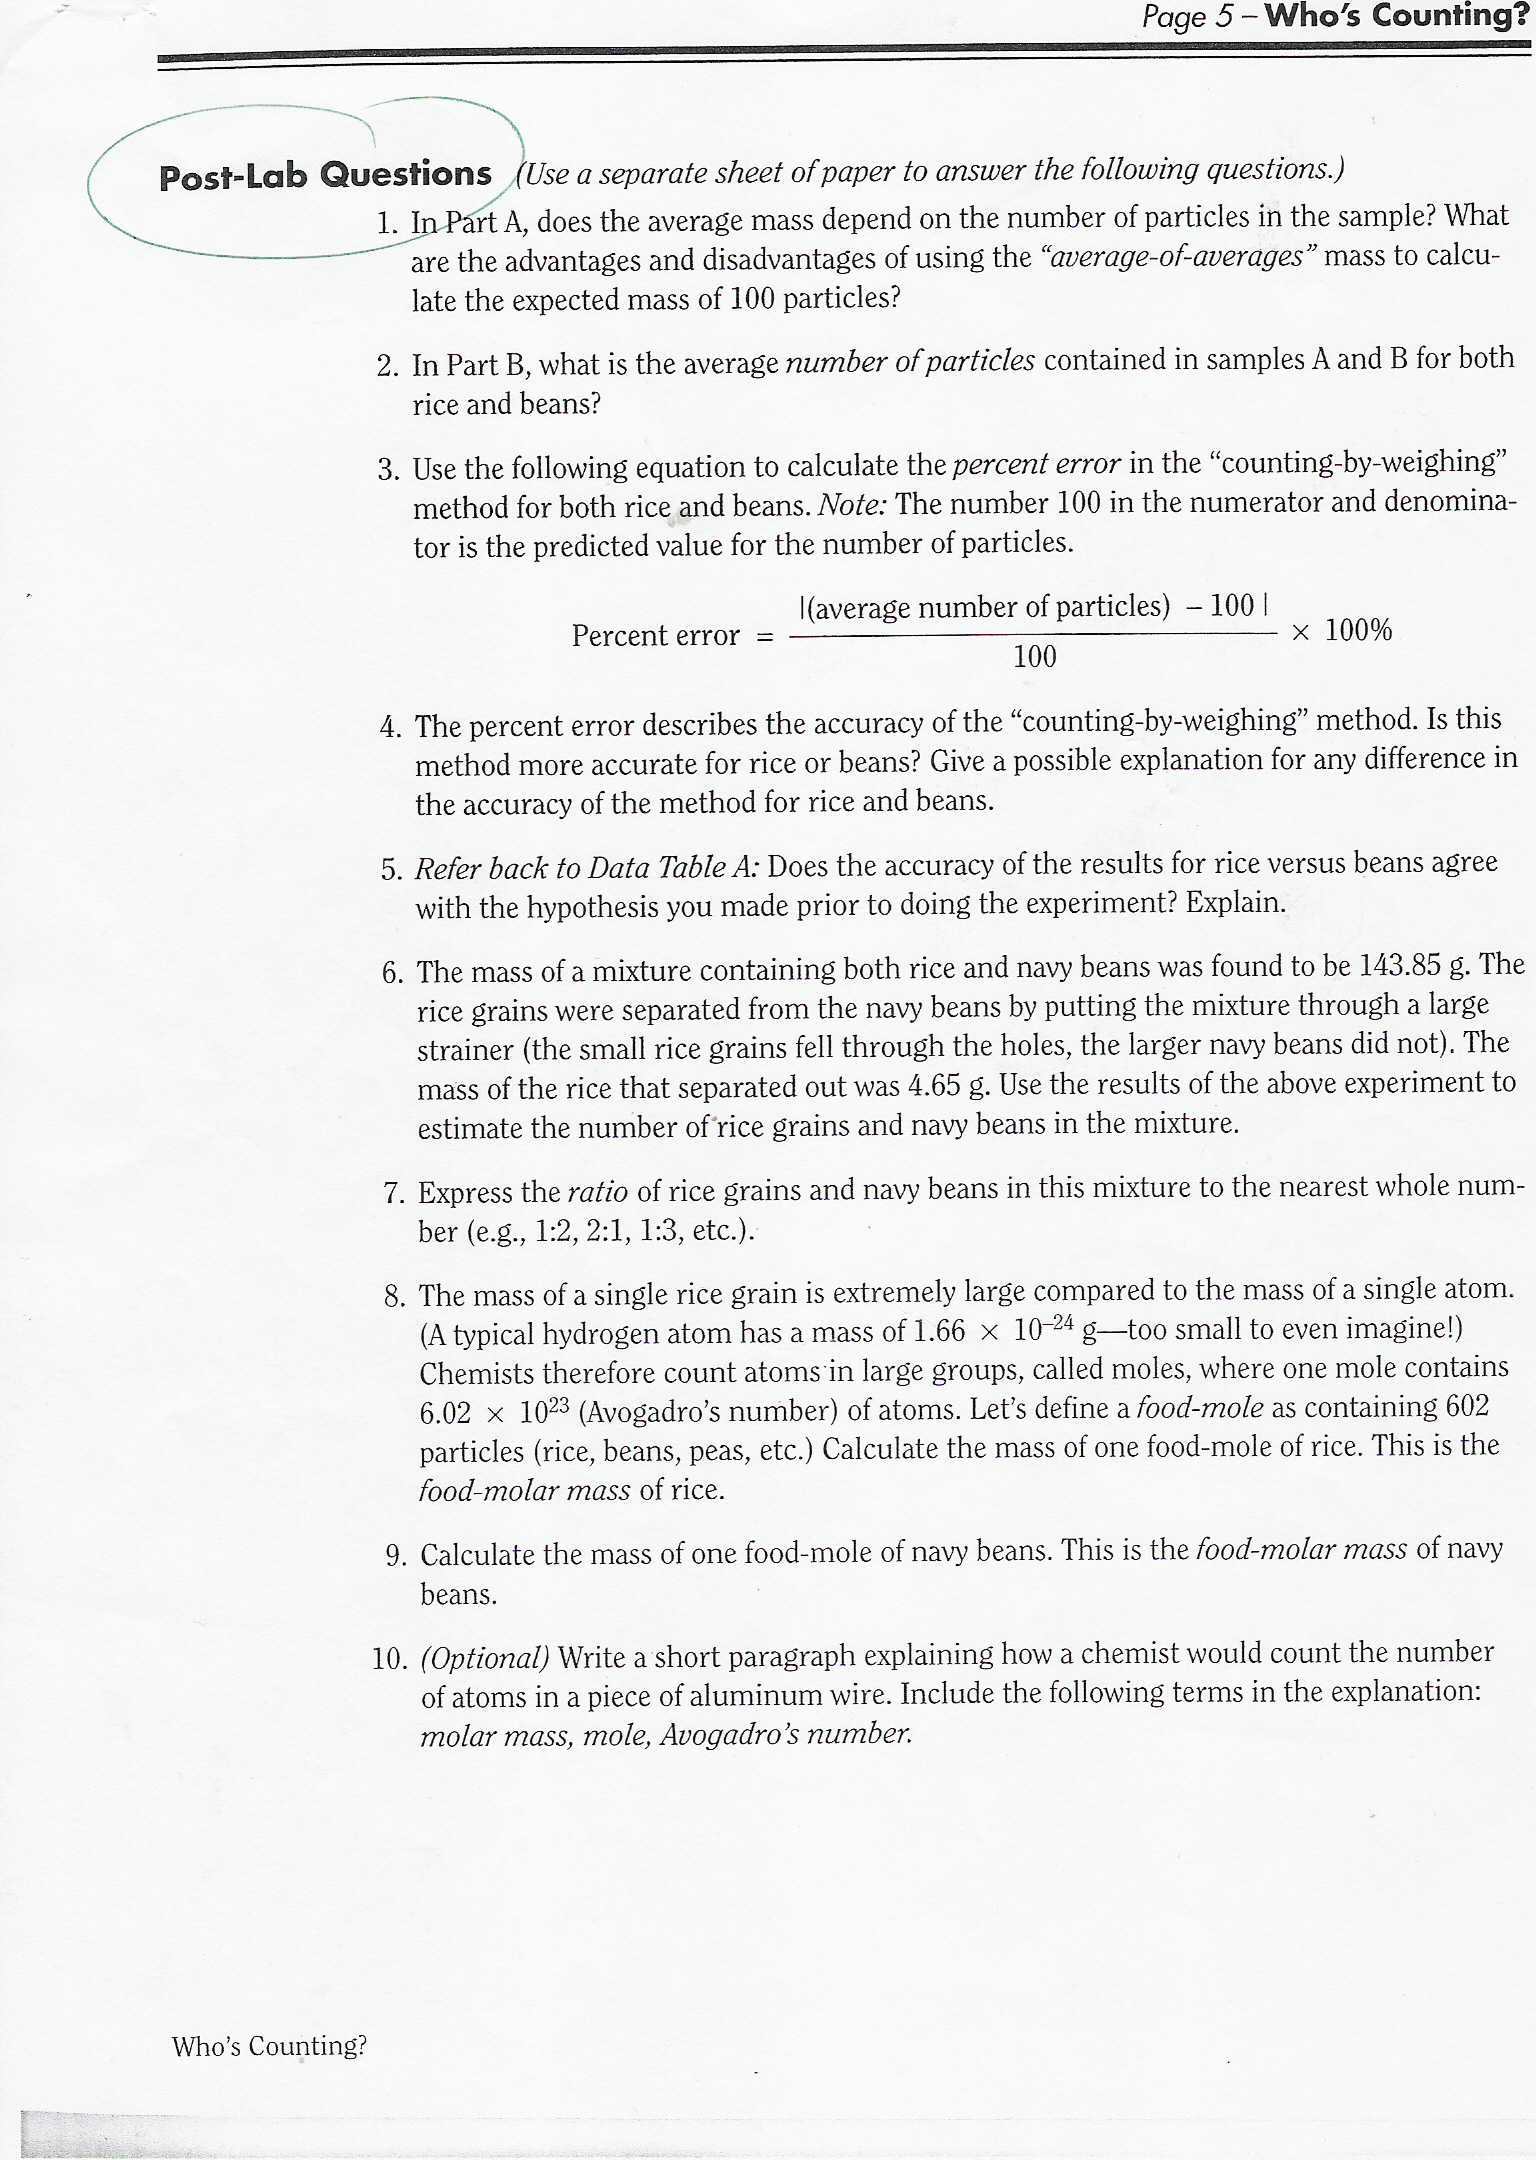 Worksheet Mole Mass Problems with Worksheets Absolute Locationt Citysalvageanddesign Free E Grain